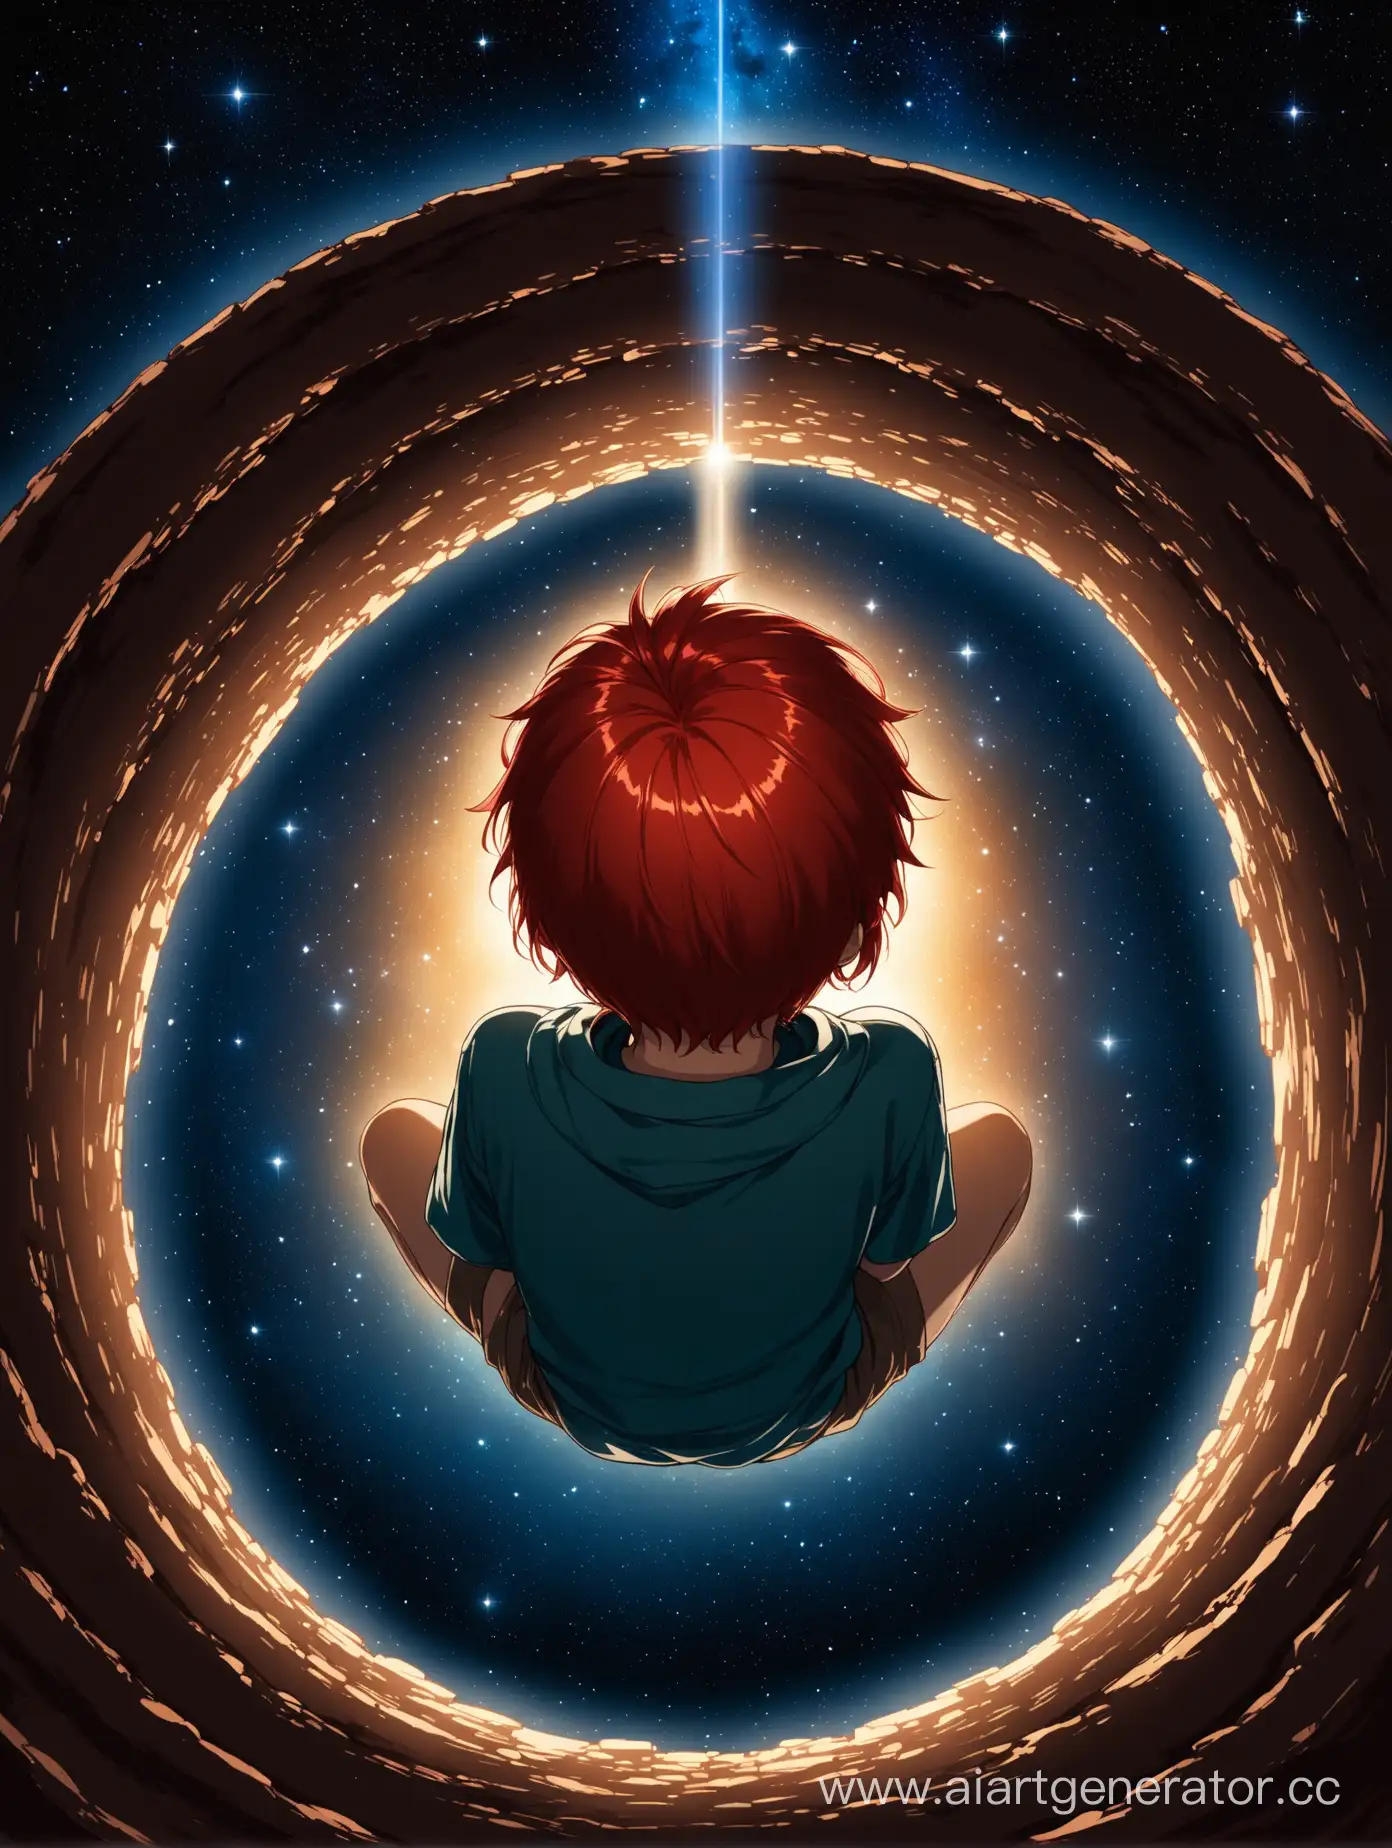 RedHaired-Boy-in-Celestial-Glow-Portrait-of-a-Child-in-Cosmic-Illumination